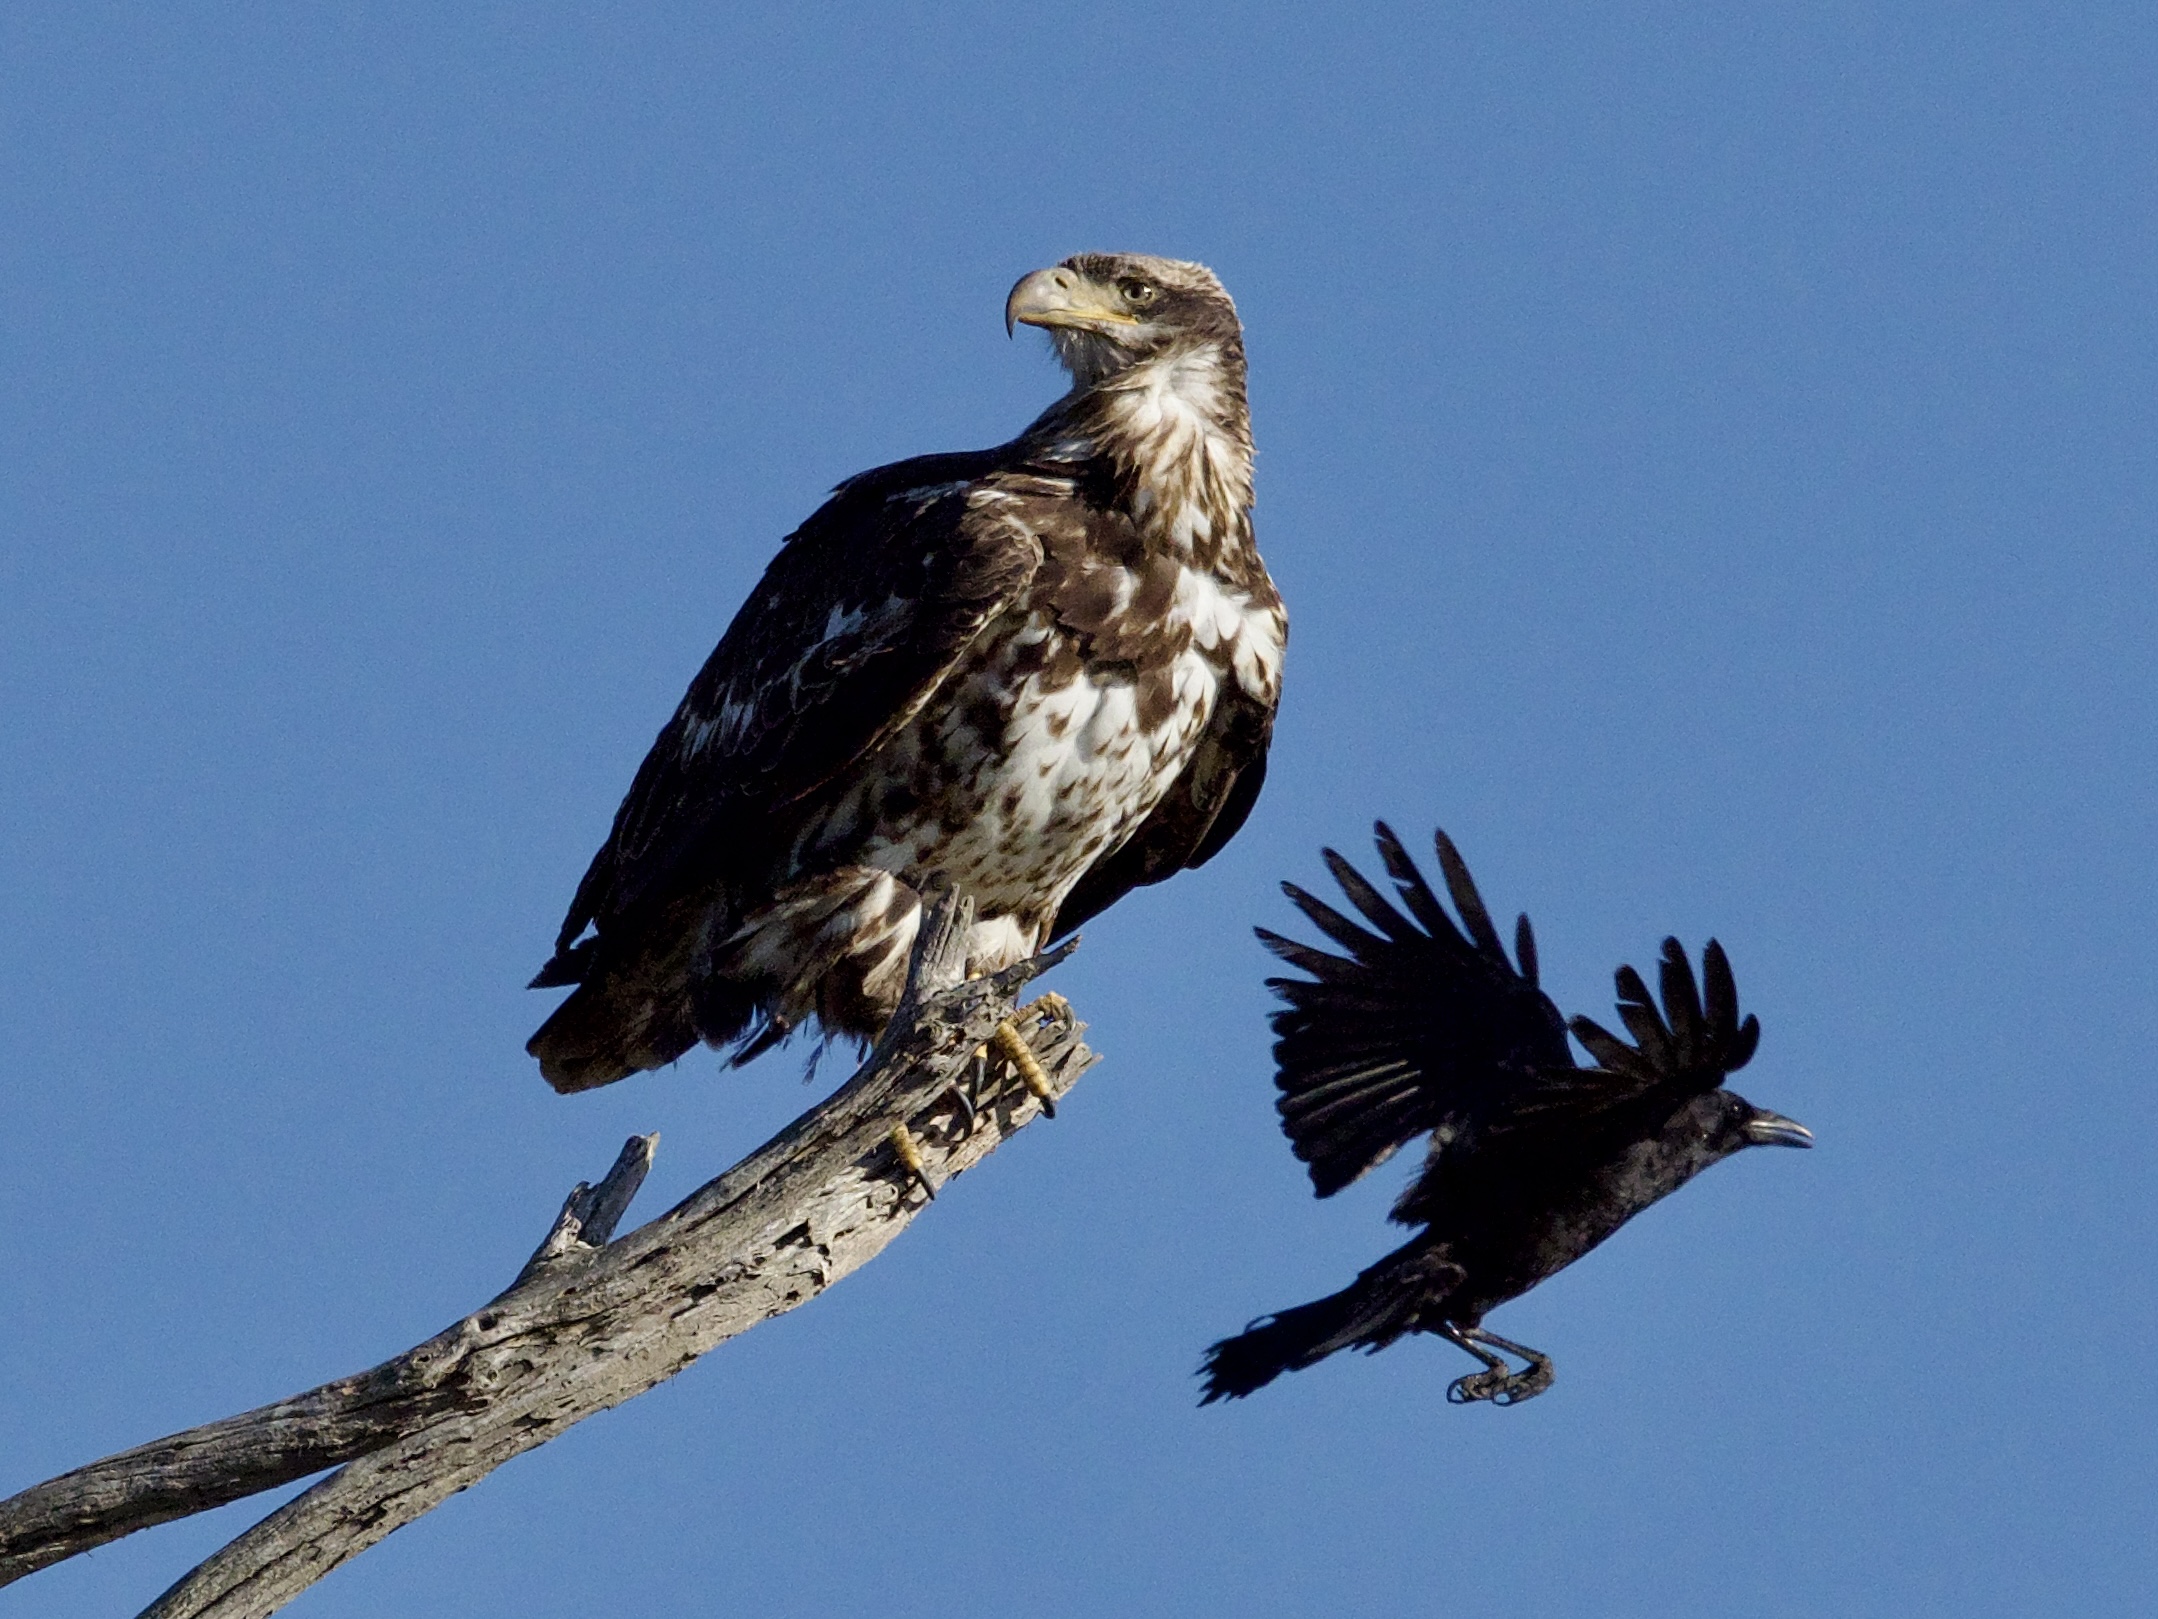 Immature Bald Eagle and crow at Bolsa Chica Wetlands